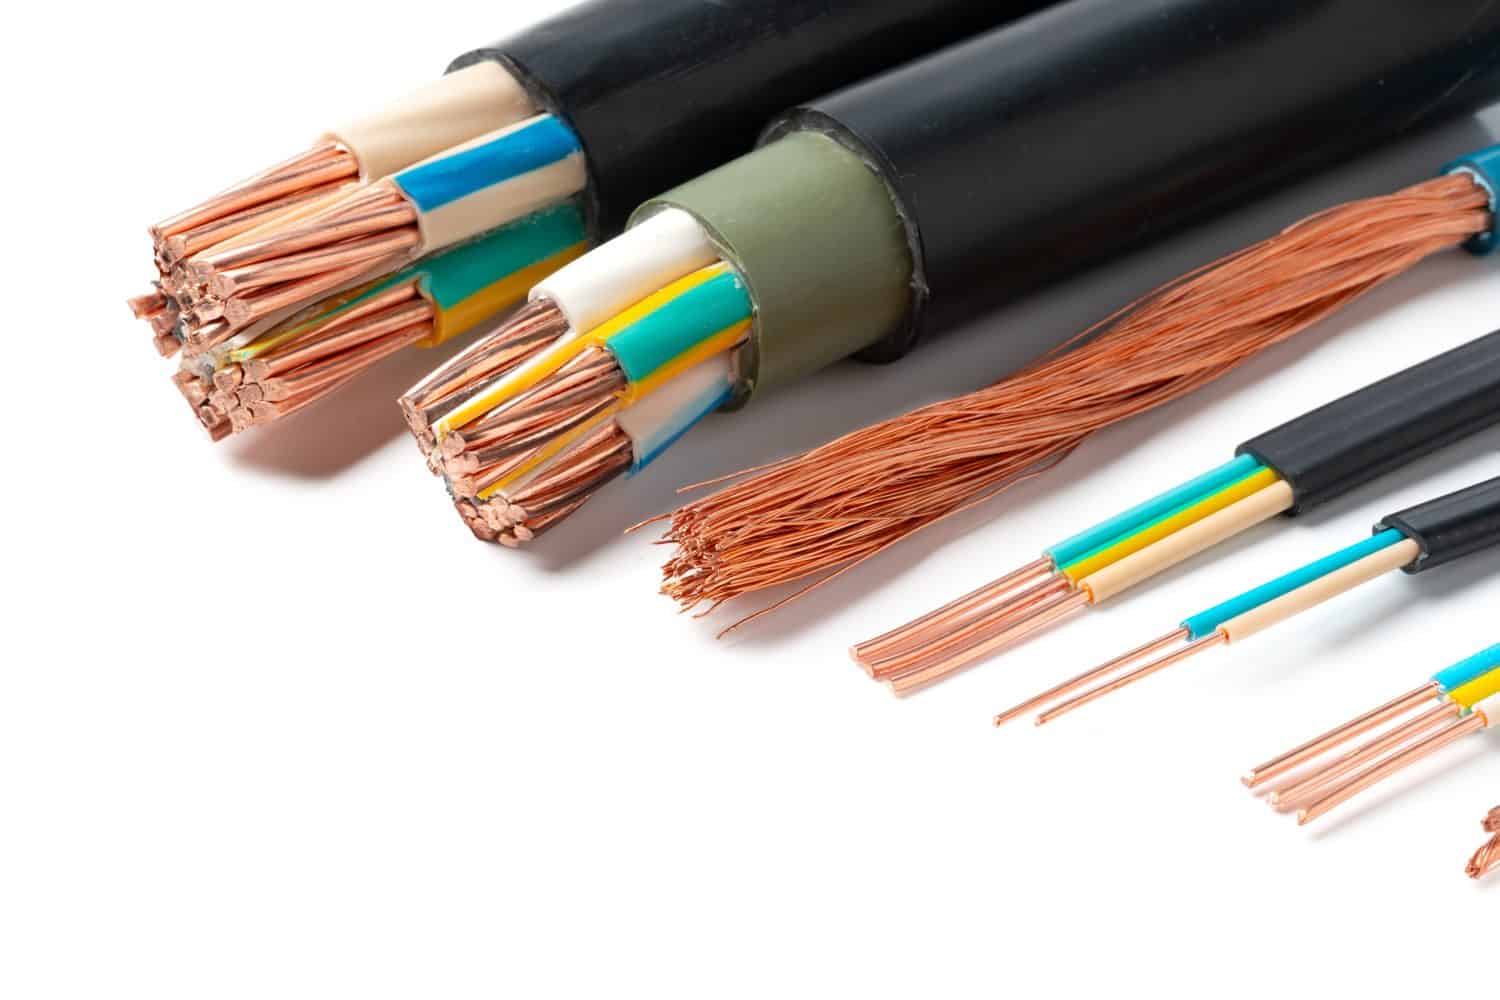 Various Electrical Wires With Exposed Copper Strands on White Background